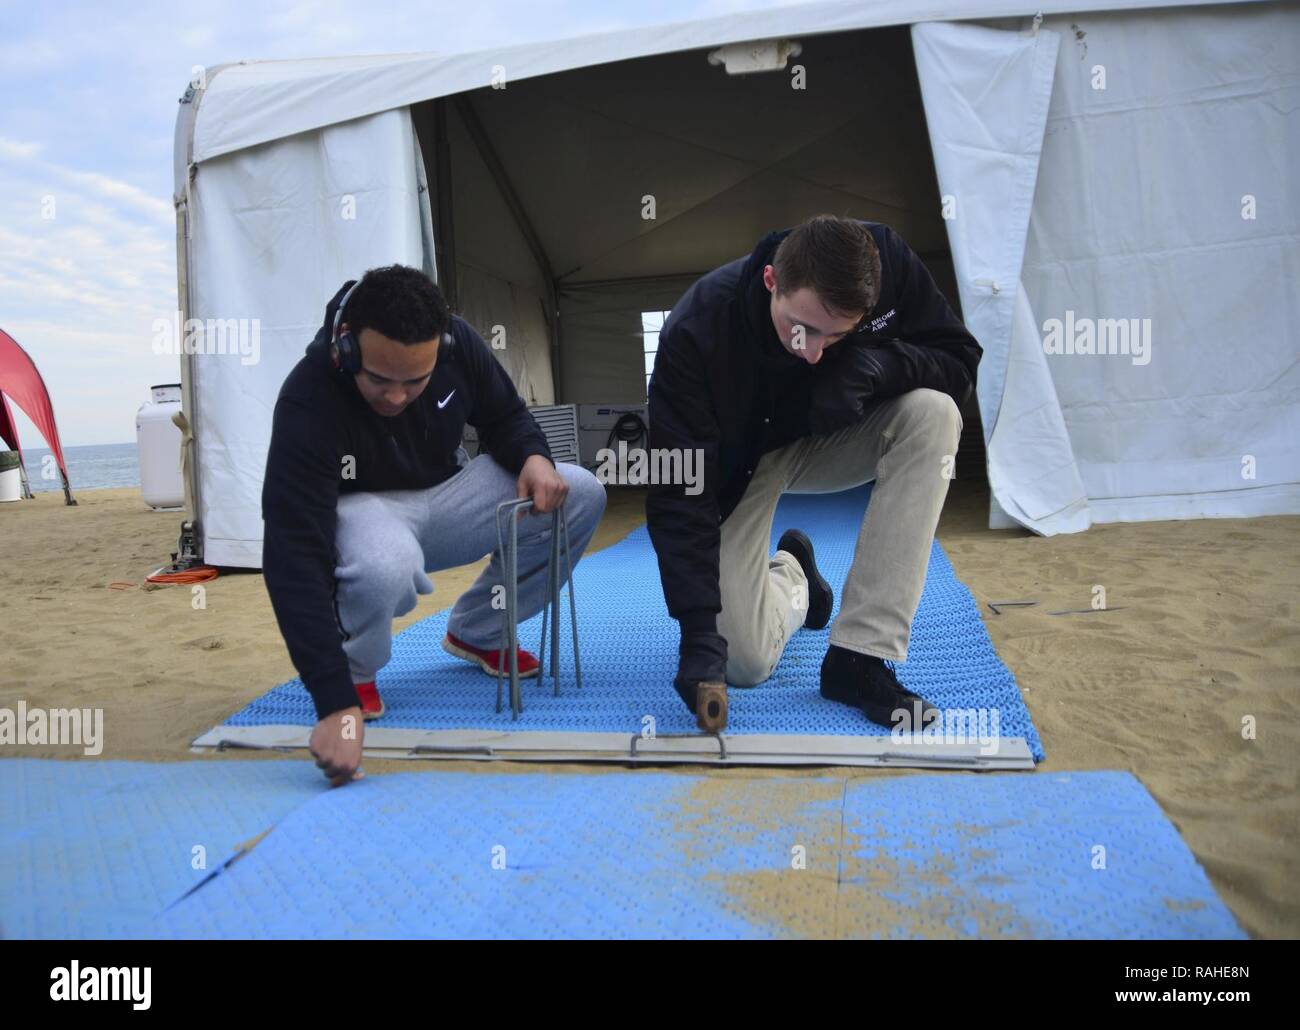 VIRGINIA BEACH, Virginia (Feb. 2, 2017) Information Systems Technician 3rd Class John Broge, from Wyandotte, Michigan and Information Systems Technician 3rd Class Shandon Williams, from Atlanta, put together a ramp. Sailors assigned to the aircraft carrier USS George Washington (CVN 73) volunteered to set up for Polar Plunge 2017  in Virginia Beach. George Washington is homeported in Norfolk preparing to move to Newport News, Virginia for the ship’s refueling complex overhaul (RCOH) maintenance. Stock Photo